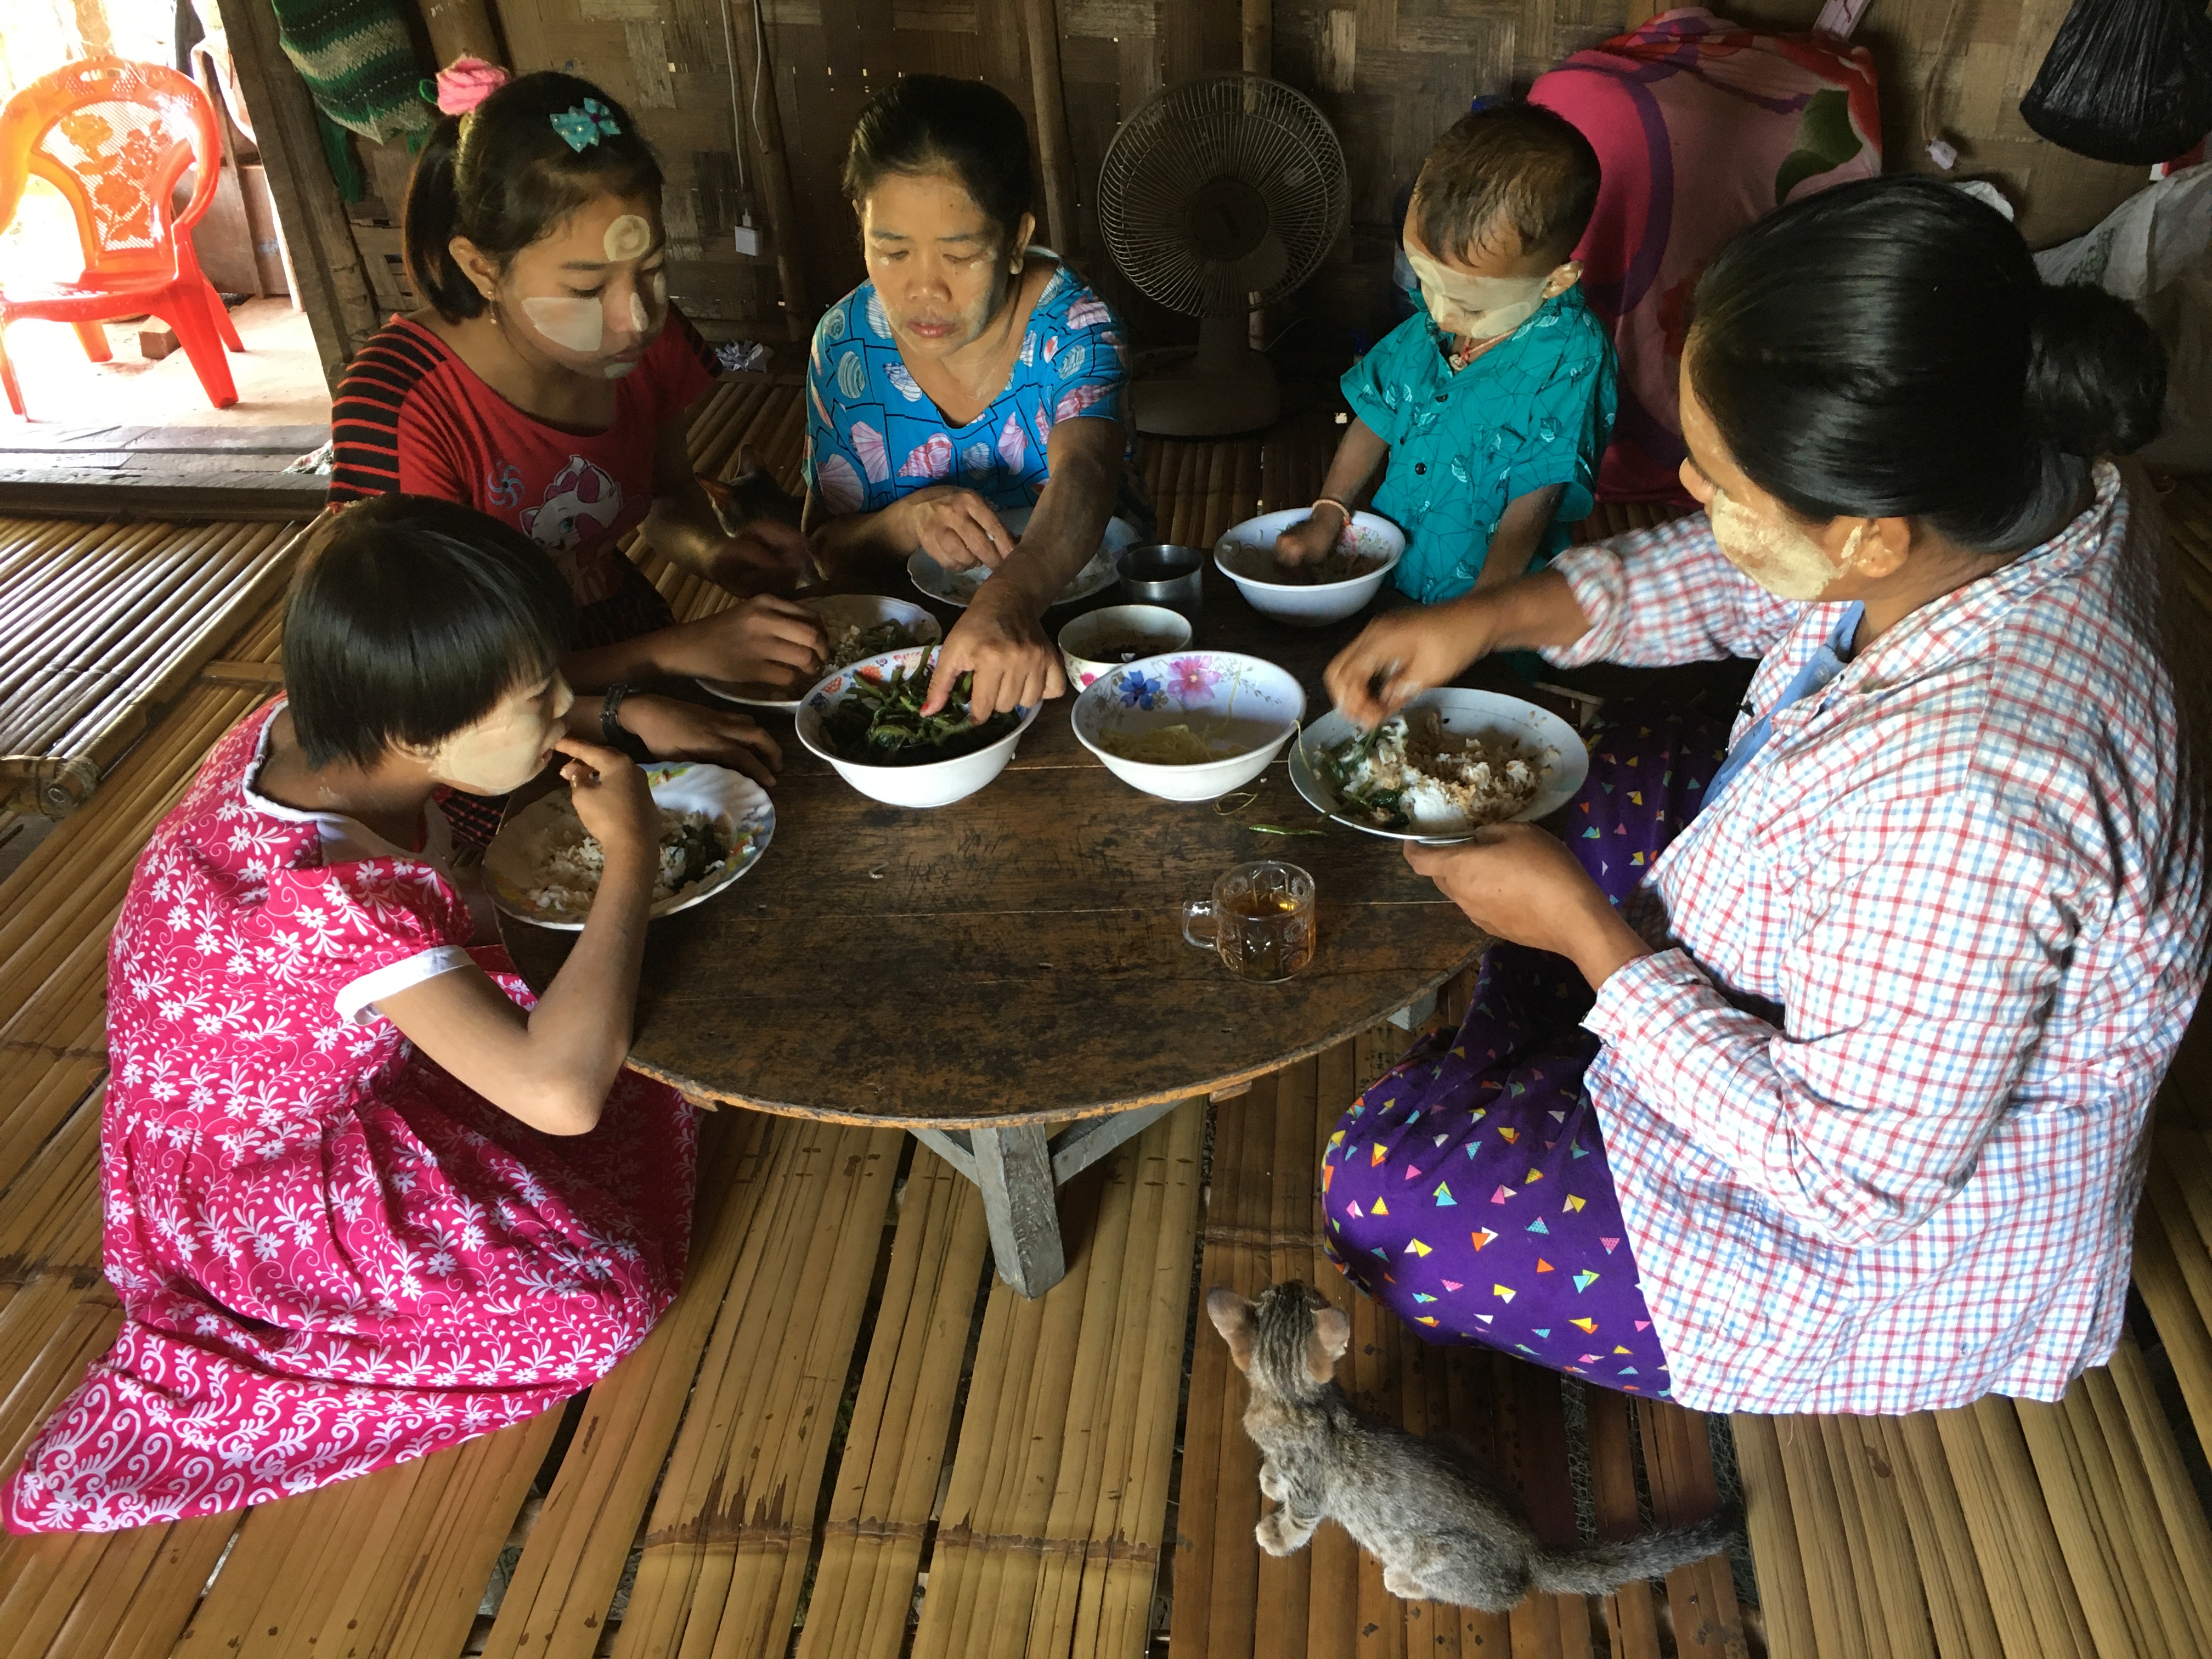 Woman from Myanmar and her 4 children sitting in a circle on the floor and eating with their hands from a round table.